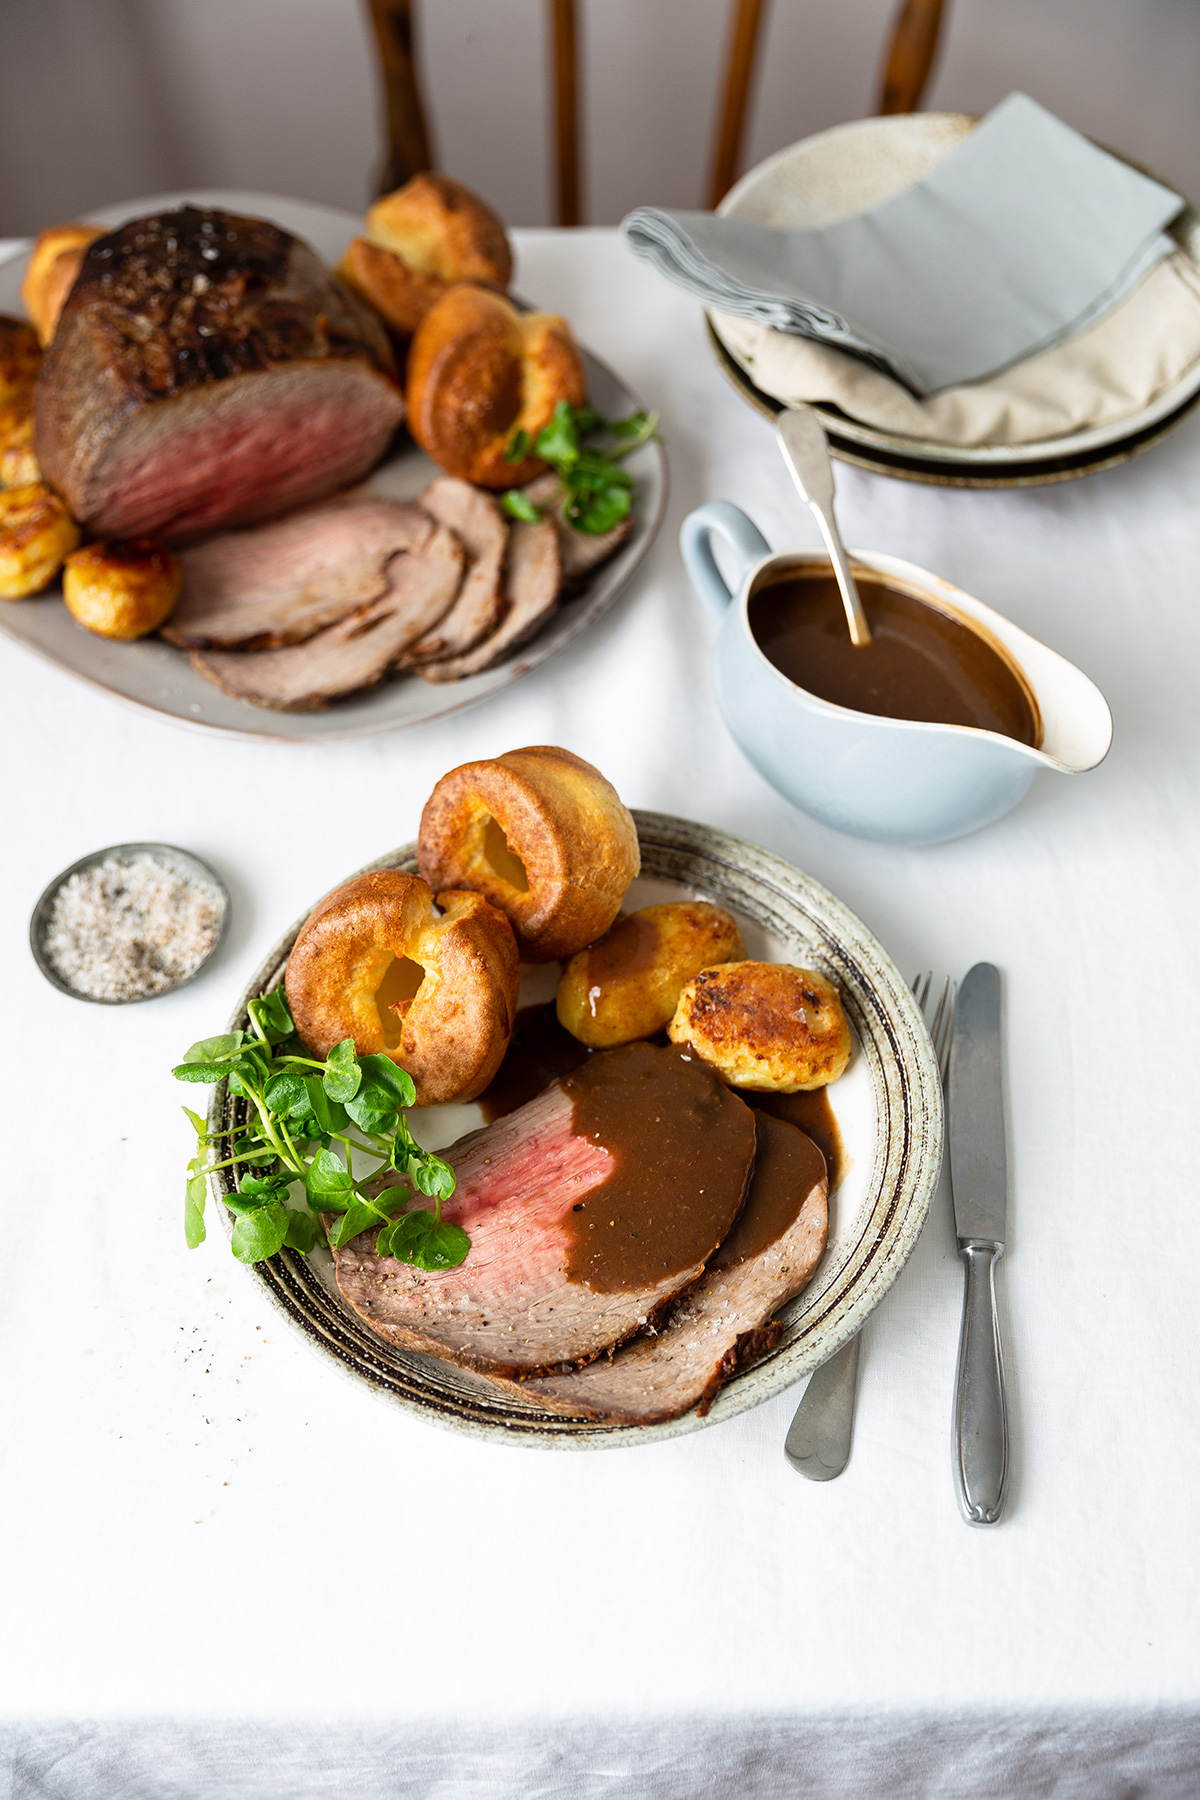 Classic roast beef and yorkshire pudding